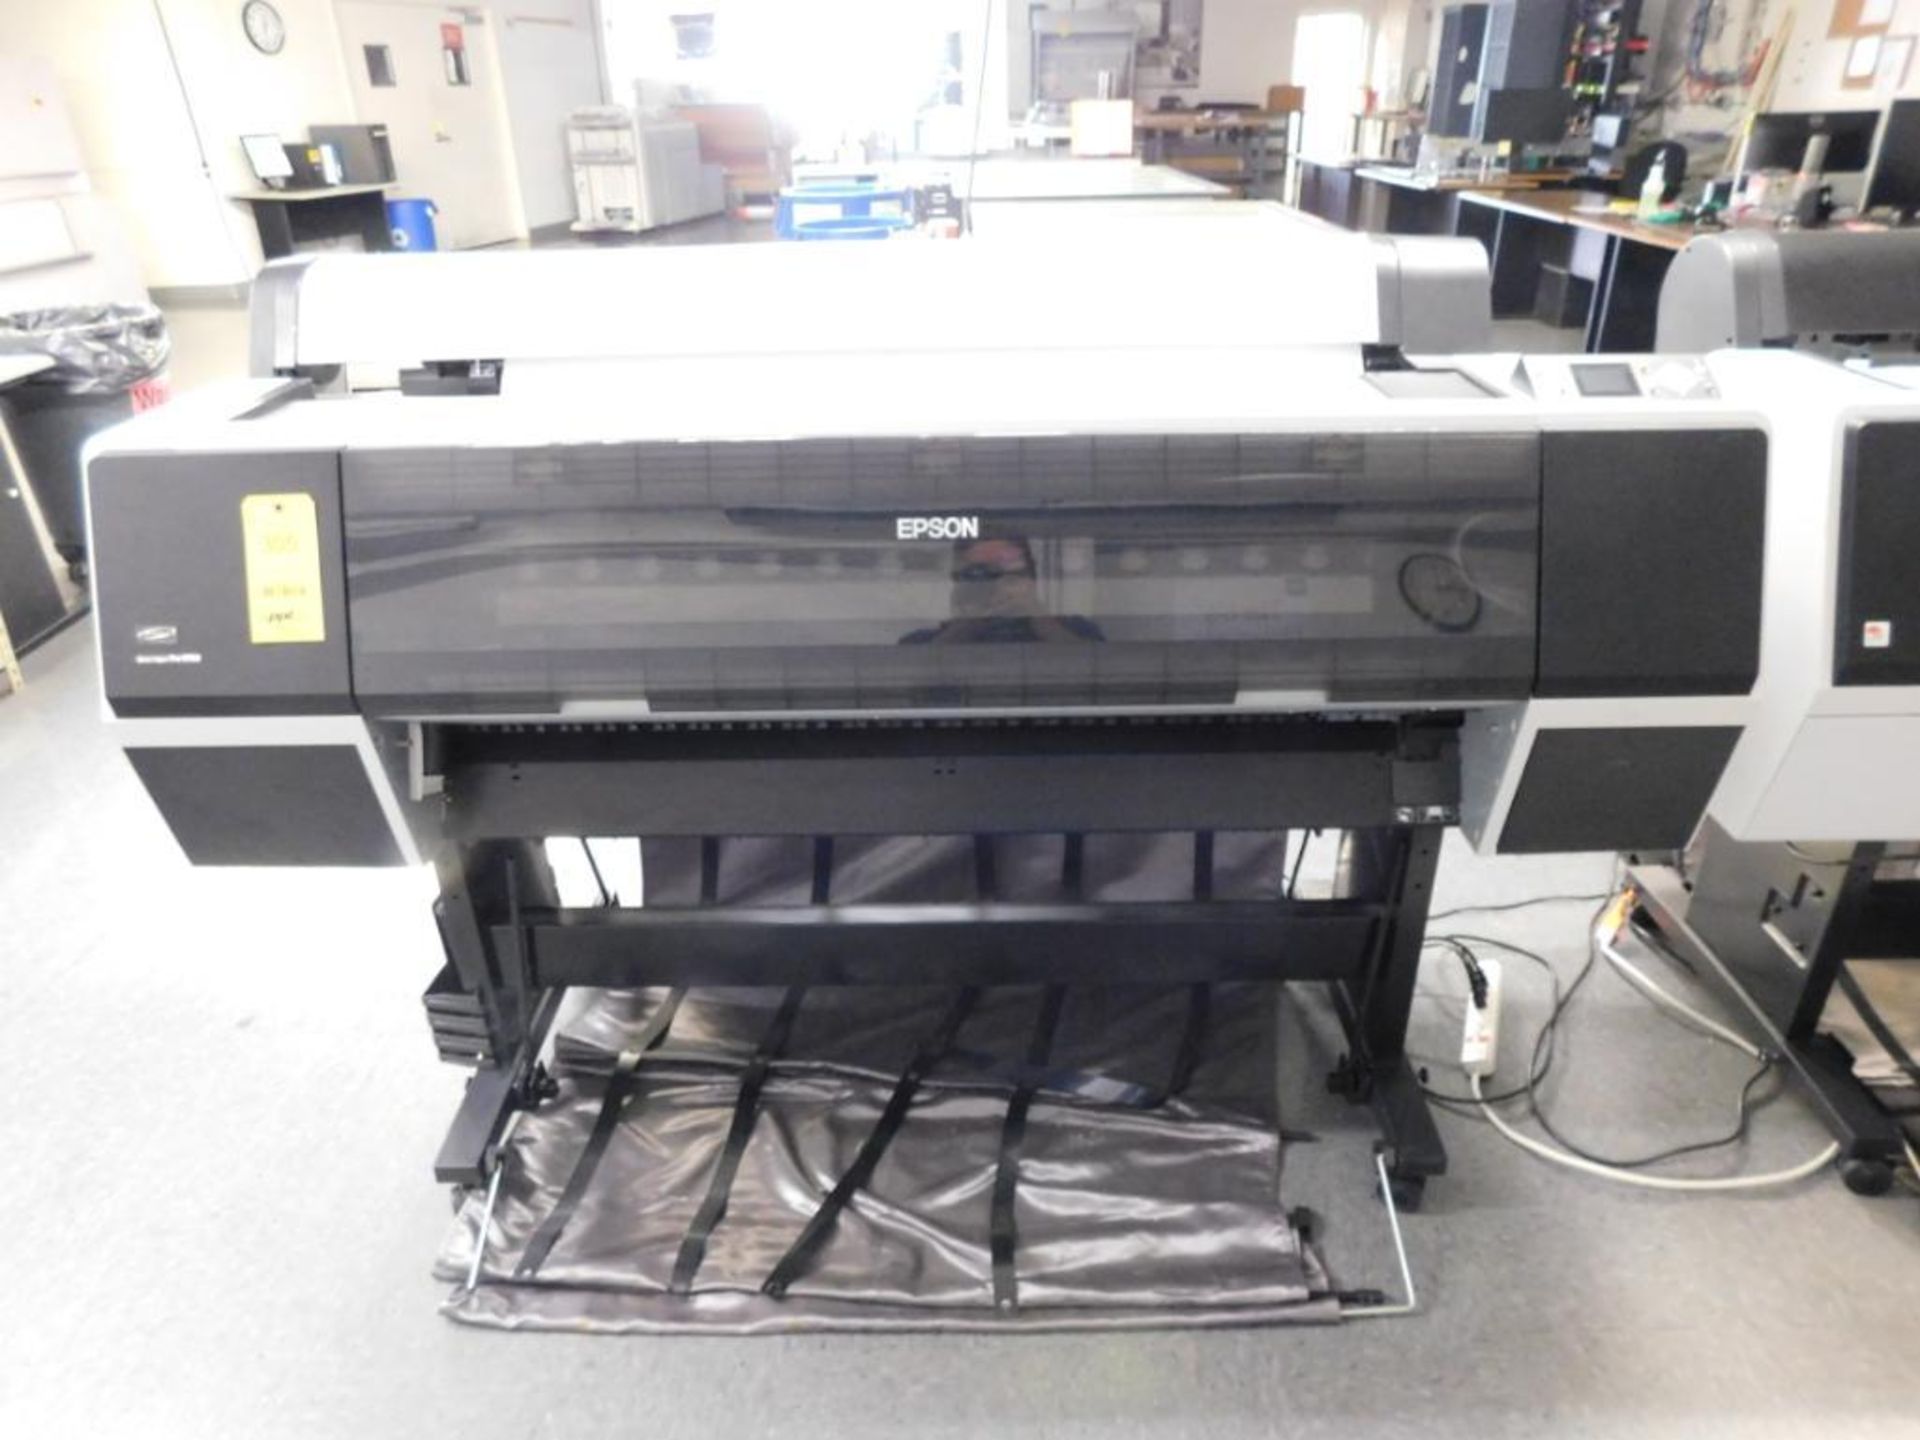 Epson Stylus Pro 9700 Large Format Printer Model K126A, S/N LNDE006620 (LOCATED IN MINNEAPOLIS, MN.)